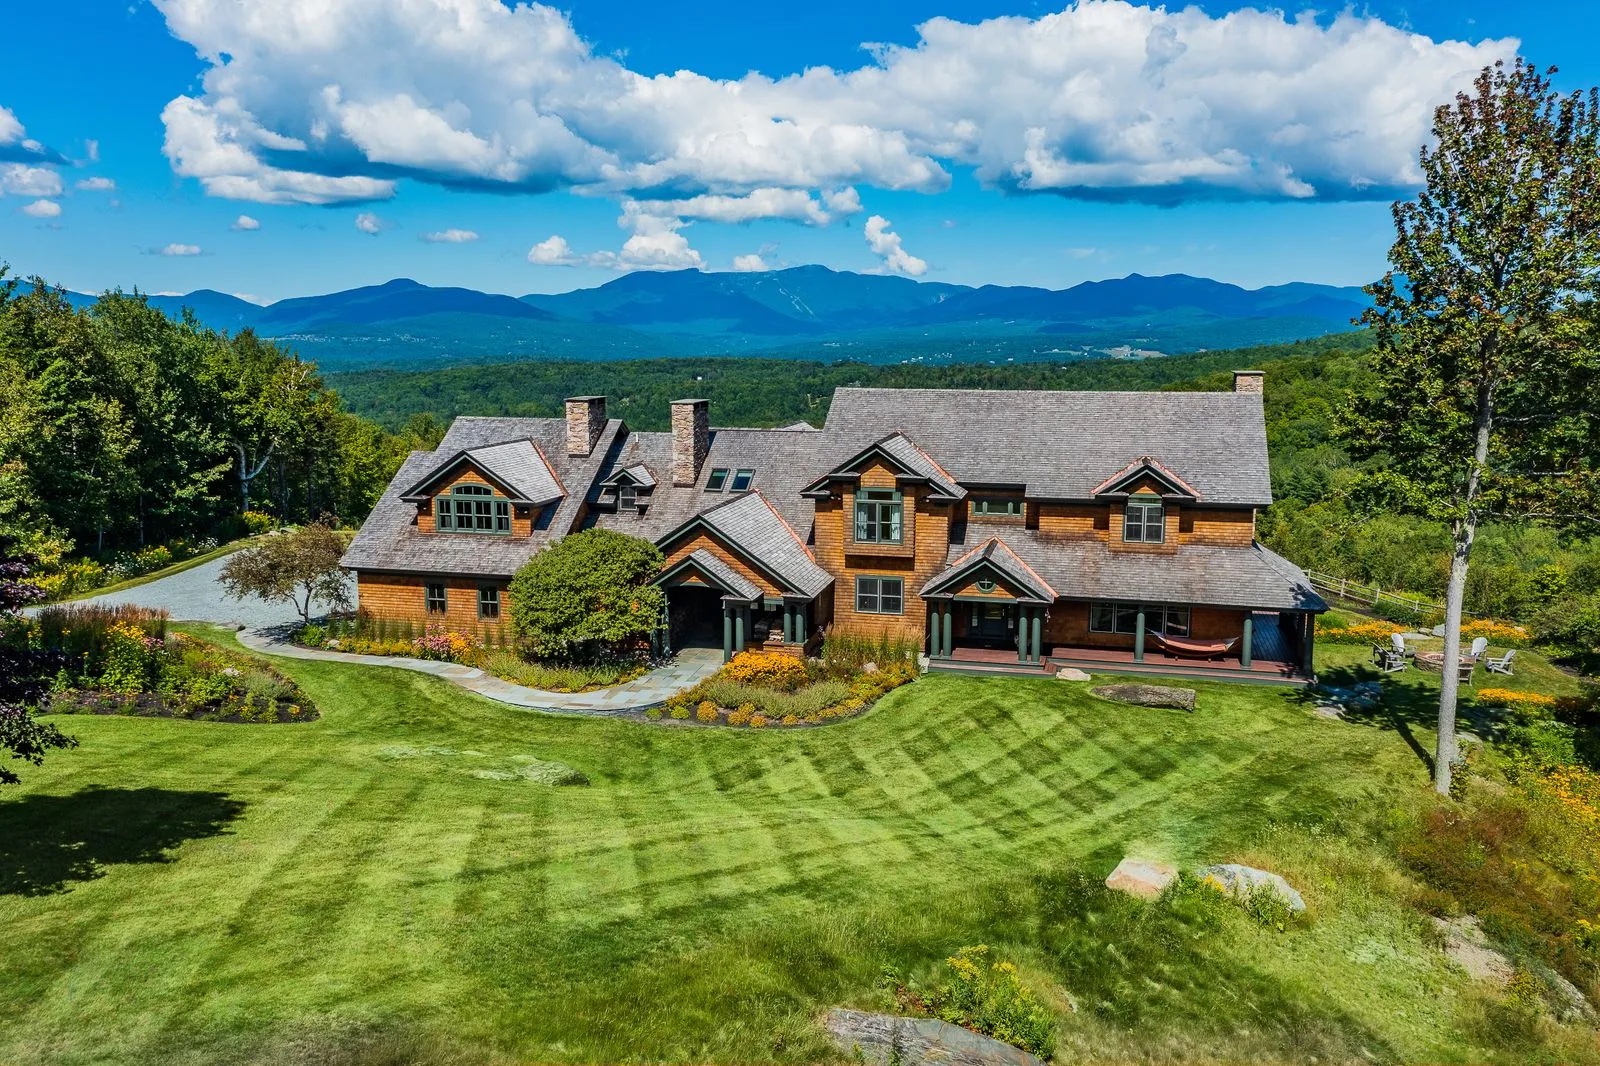 Shingle style home in Stowe, Vermont